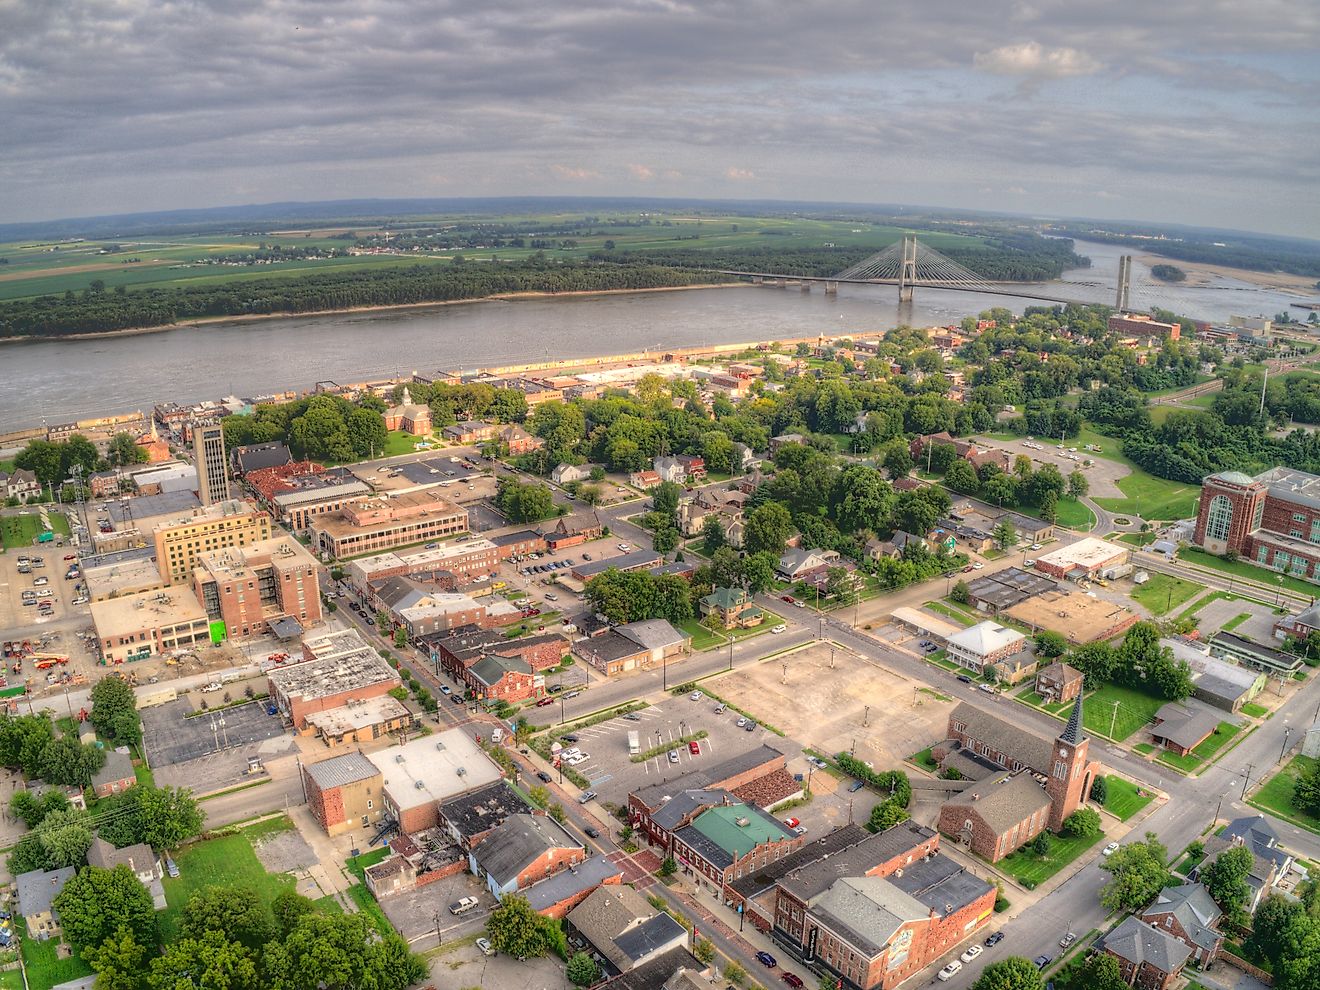 Aerial view of Cape Girardeau, a town that played an important role in forming the Missouri Bootheel.